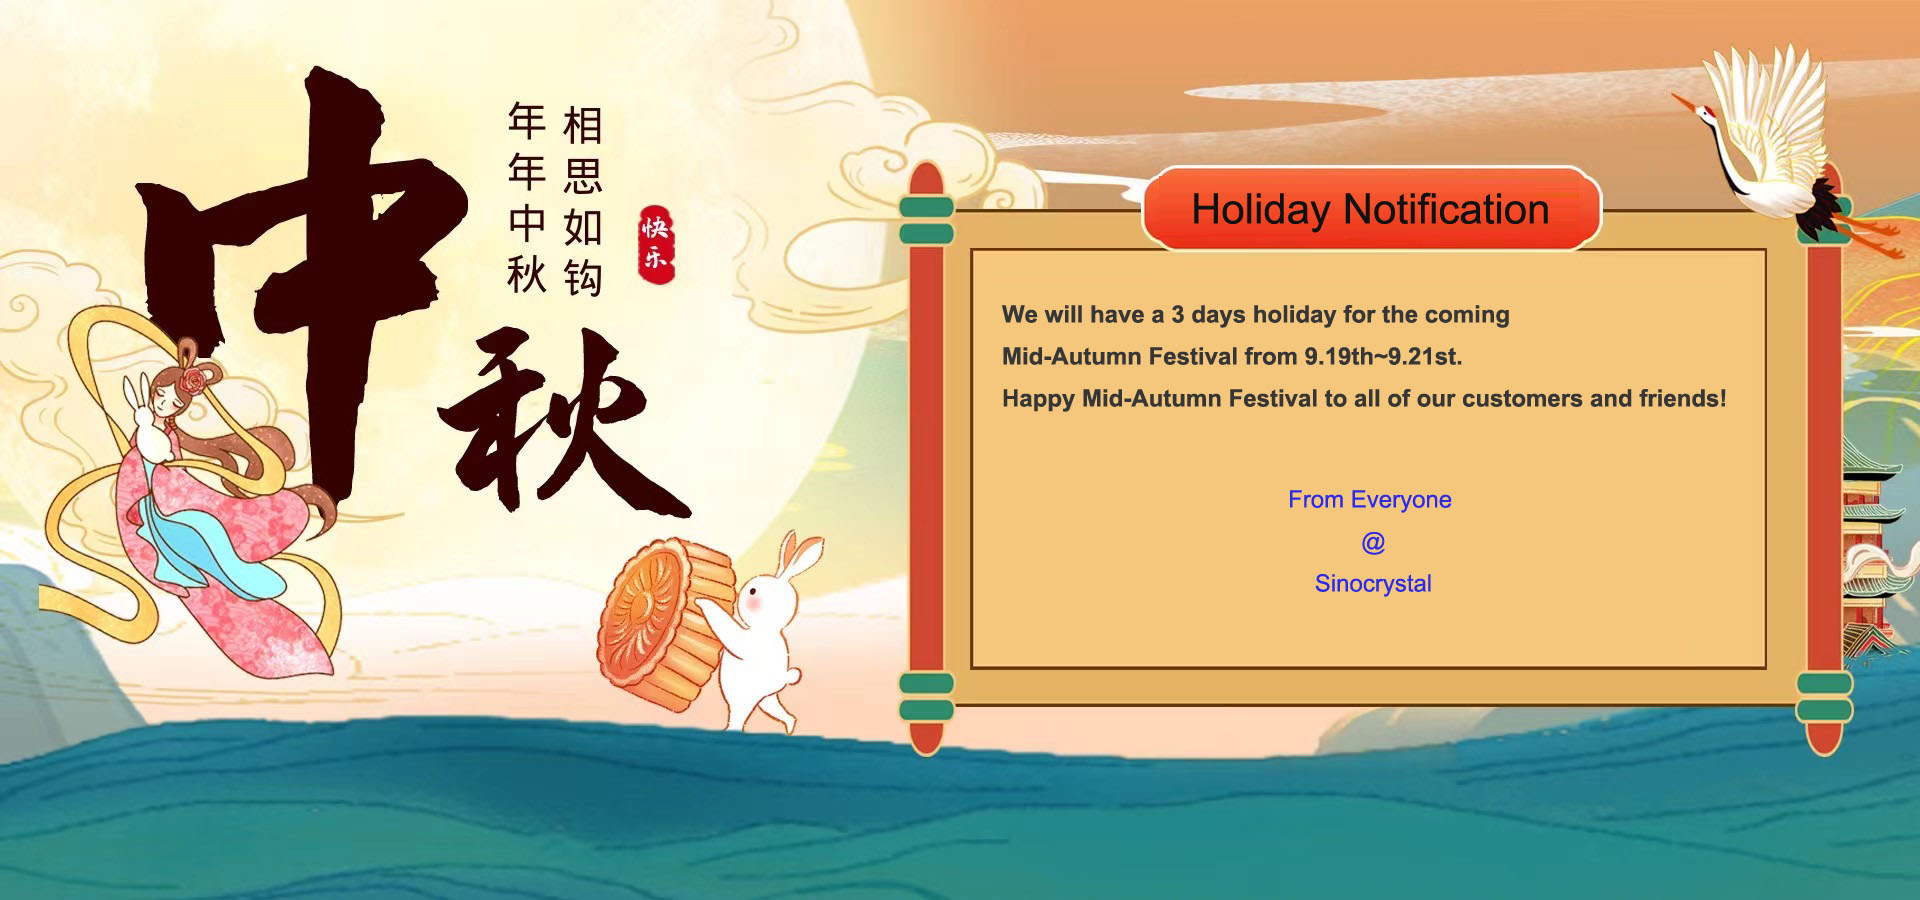 Greeting from Sinocrystal for Mid-Autumn Festival